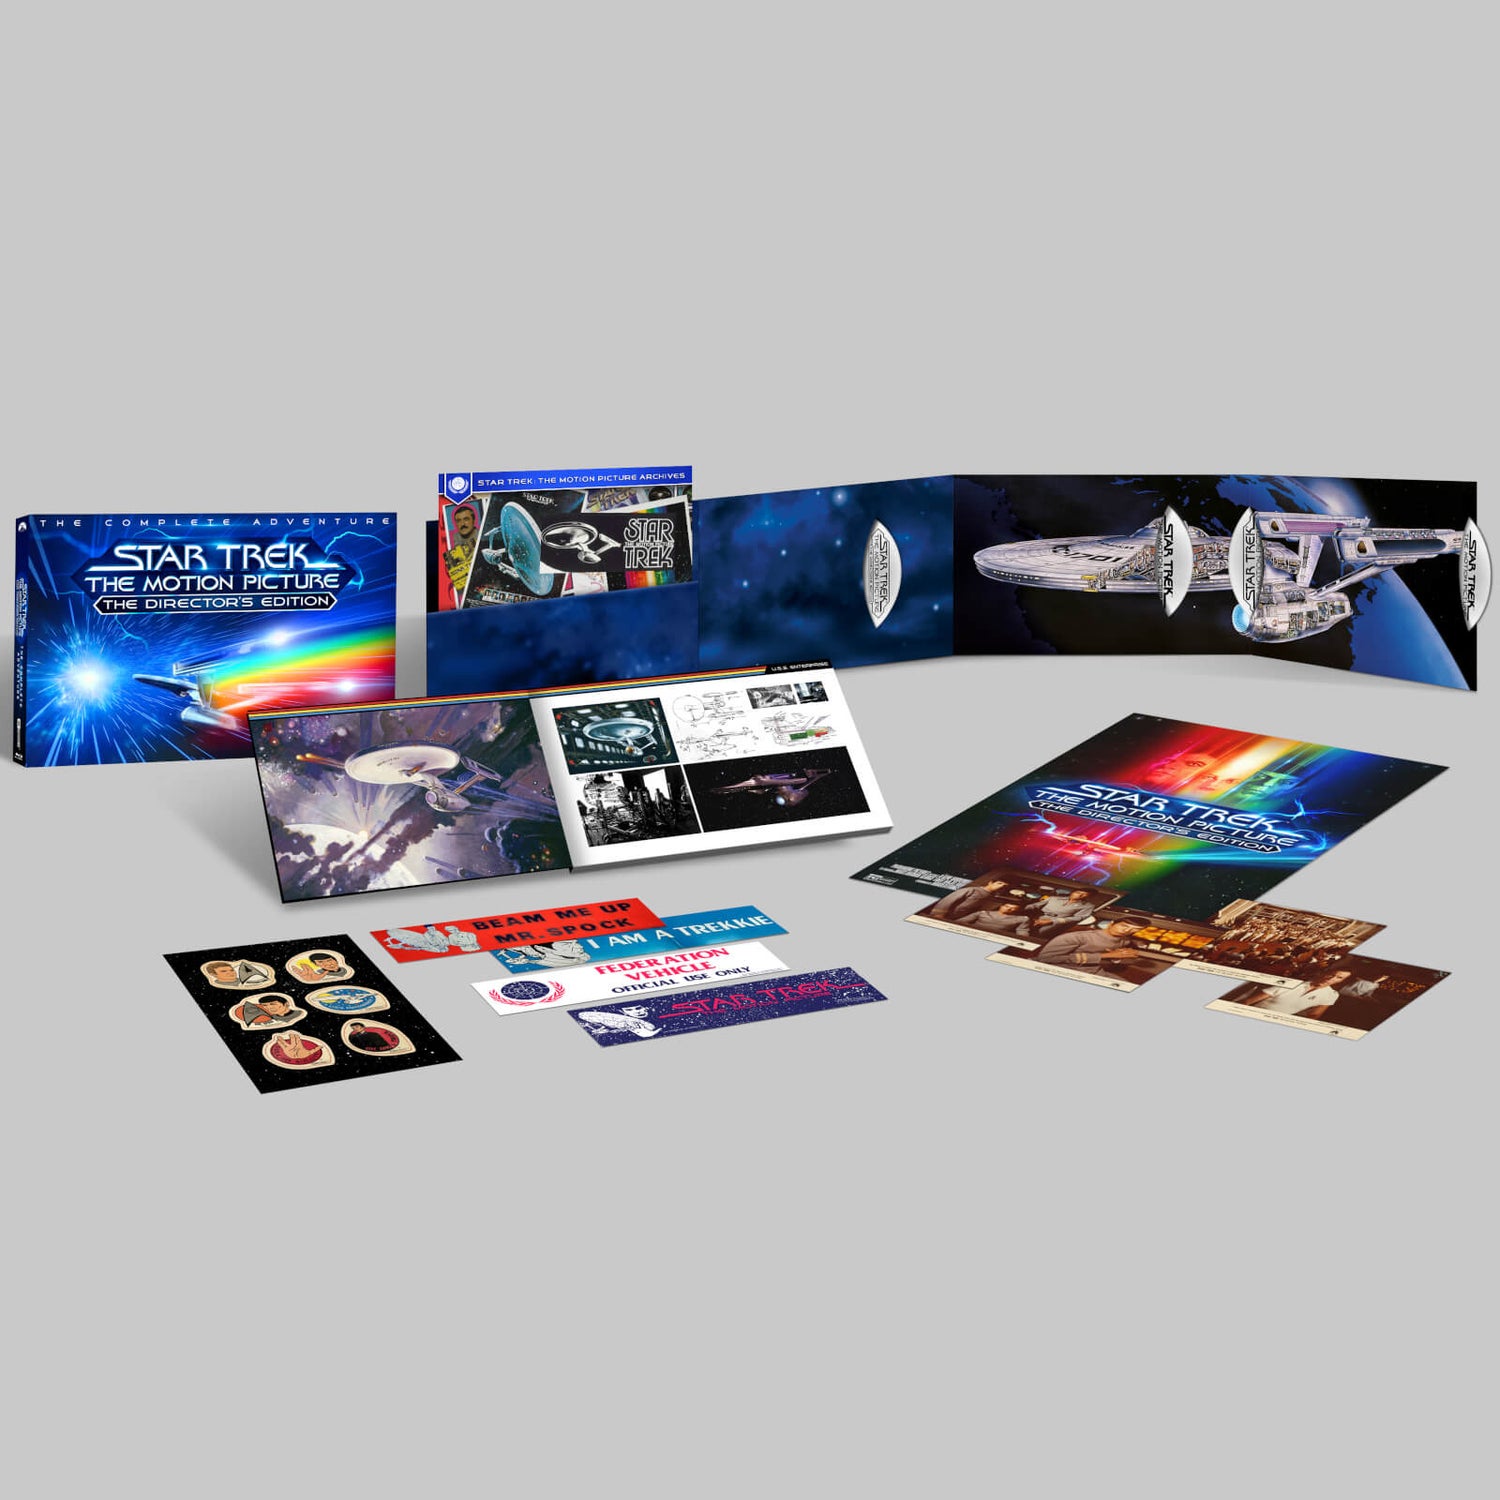 Star Trek: The Motion Picture - The Director's Edition - The Complete Adventure